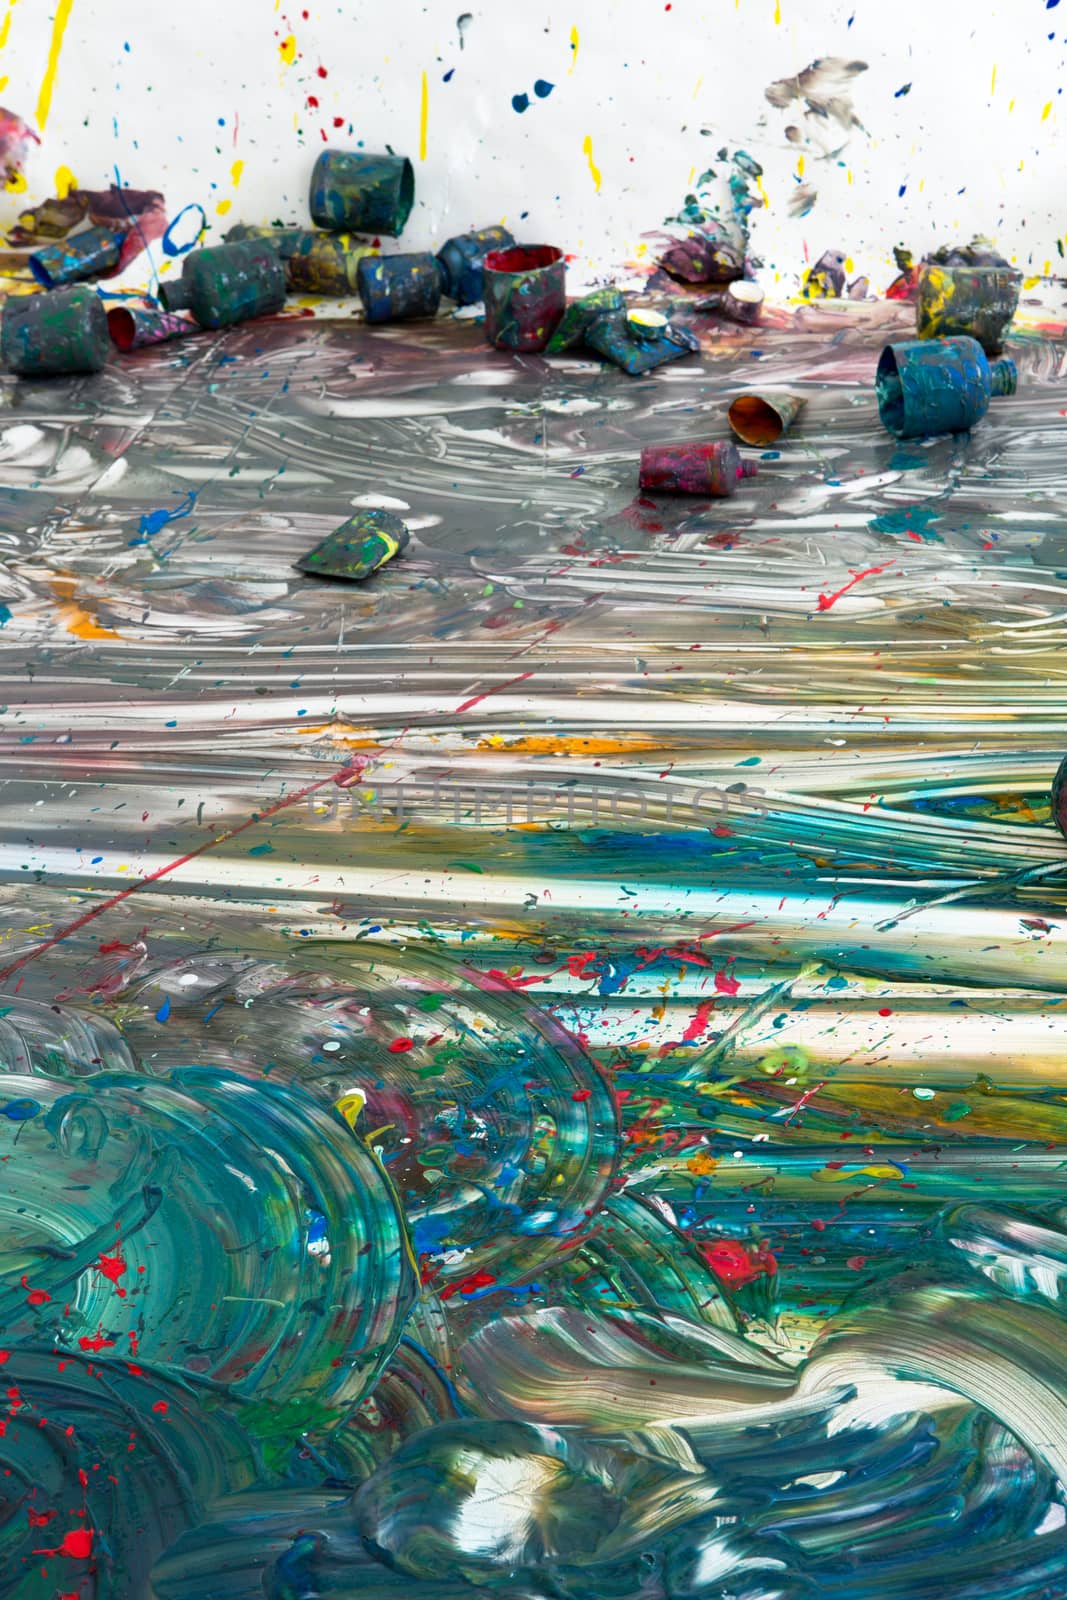 Colorful contemporary artwork on the floor with multiple discarded empty paint cans conceptual of creativity, inspiration and imagination